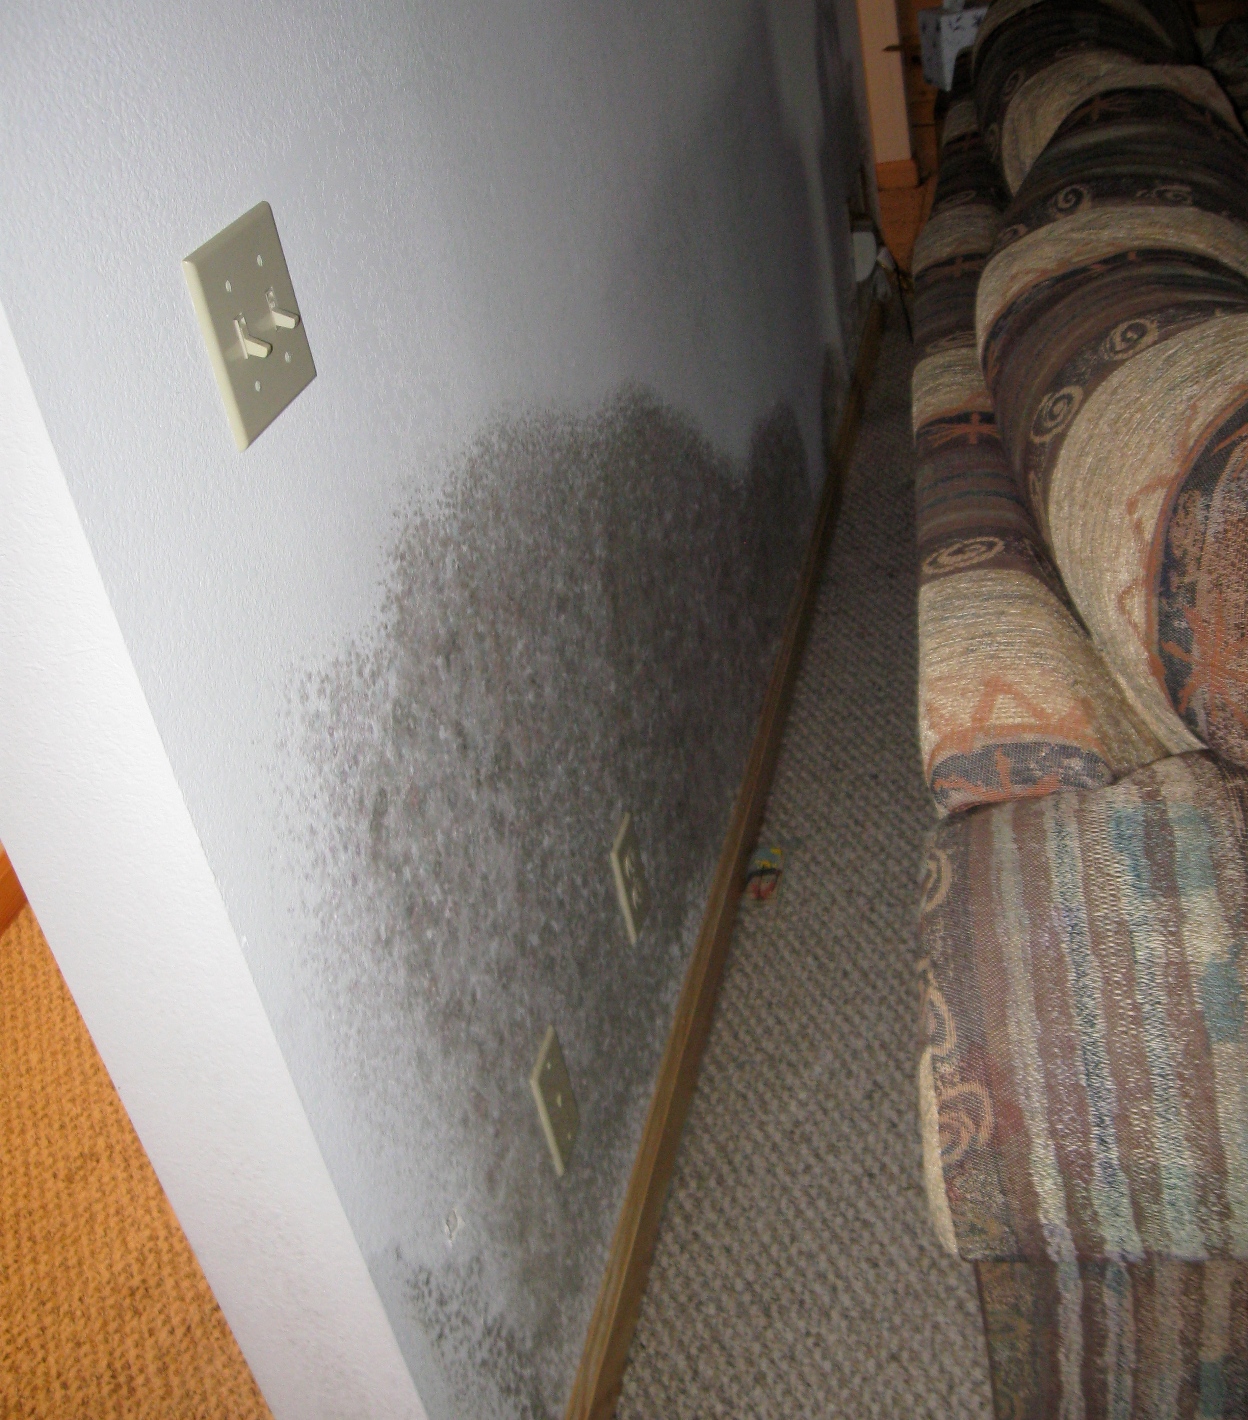 mold behind couch